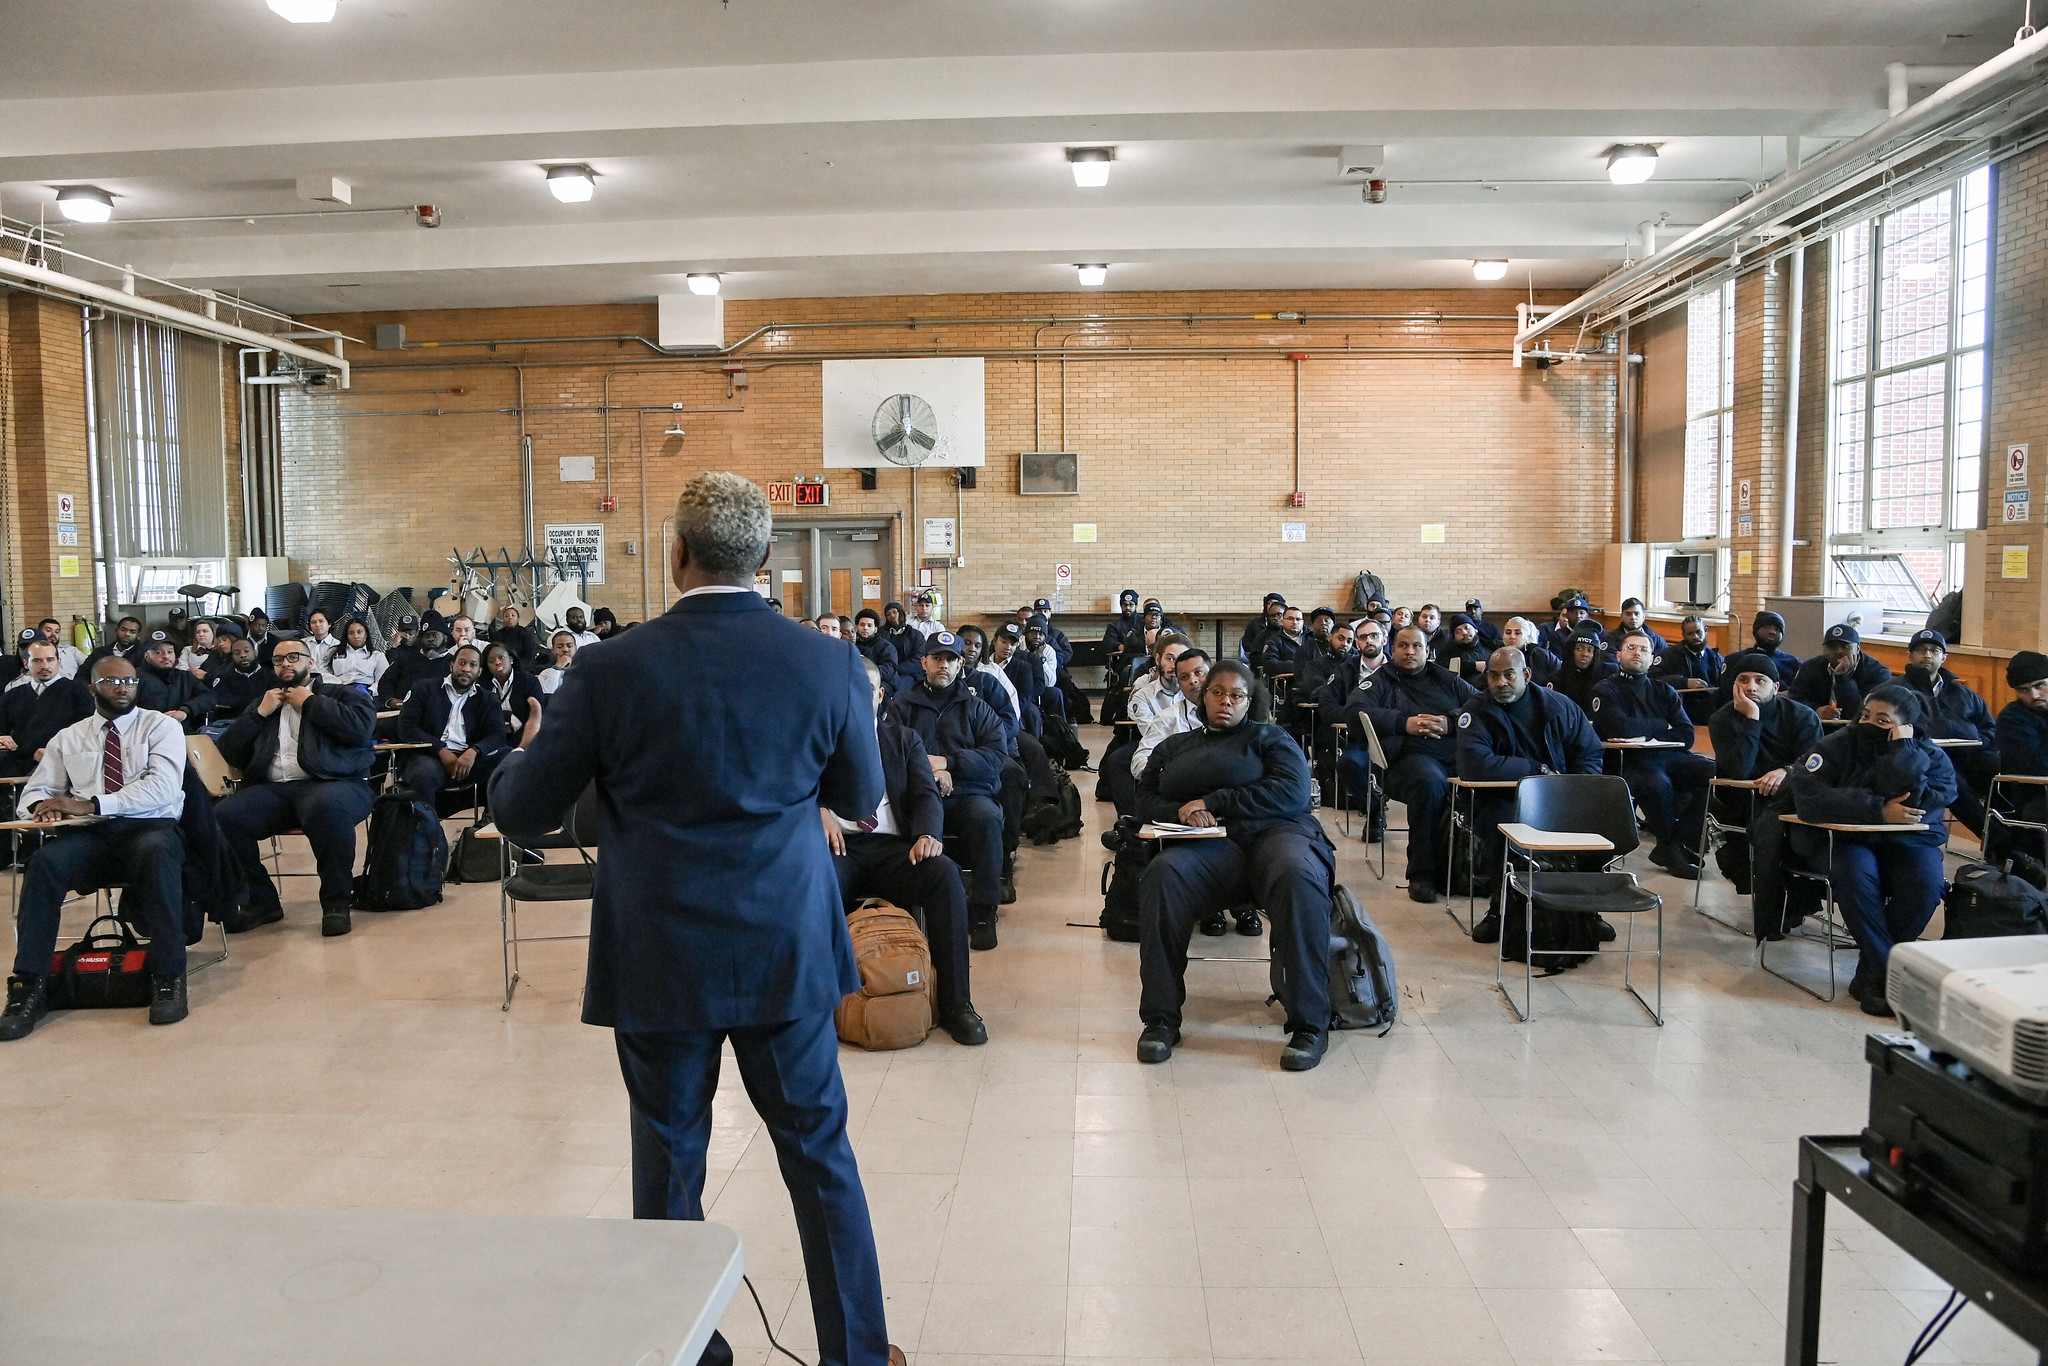 New York City Transit today announced the graduation of 84 new train operators and 10 new conductors at the New York City Transit (NYCT) Learning Center in Brooklyn, following their successful completion of six months of training. 